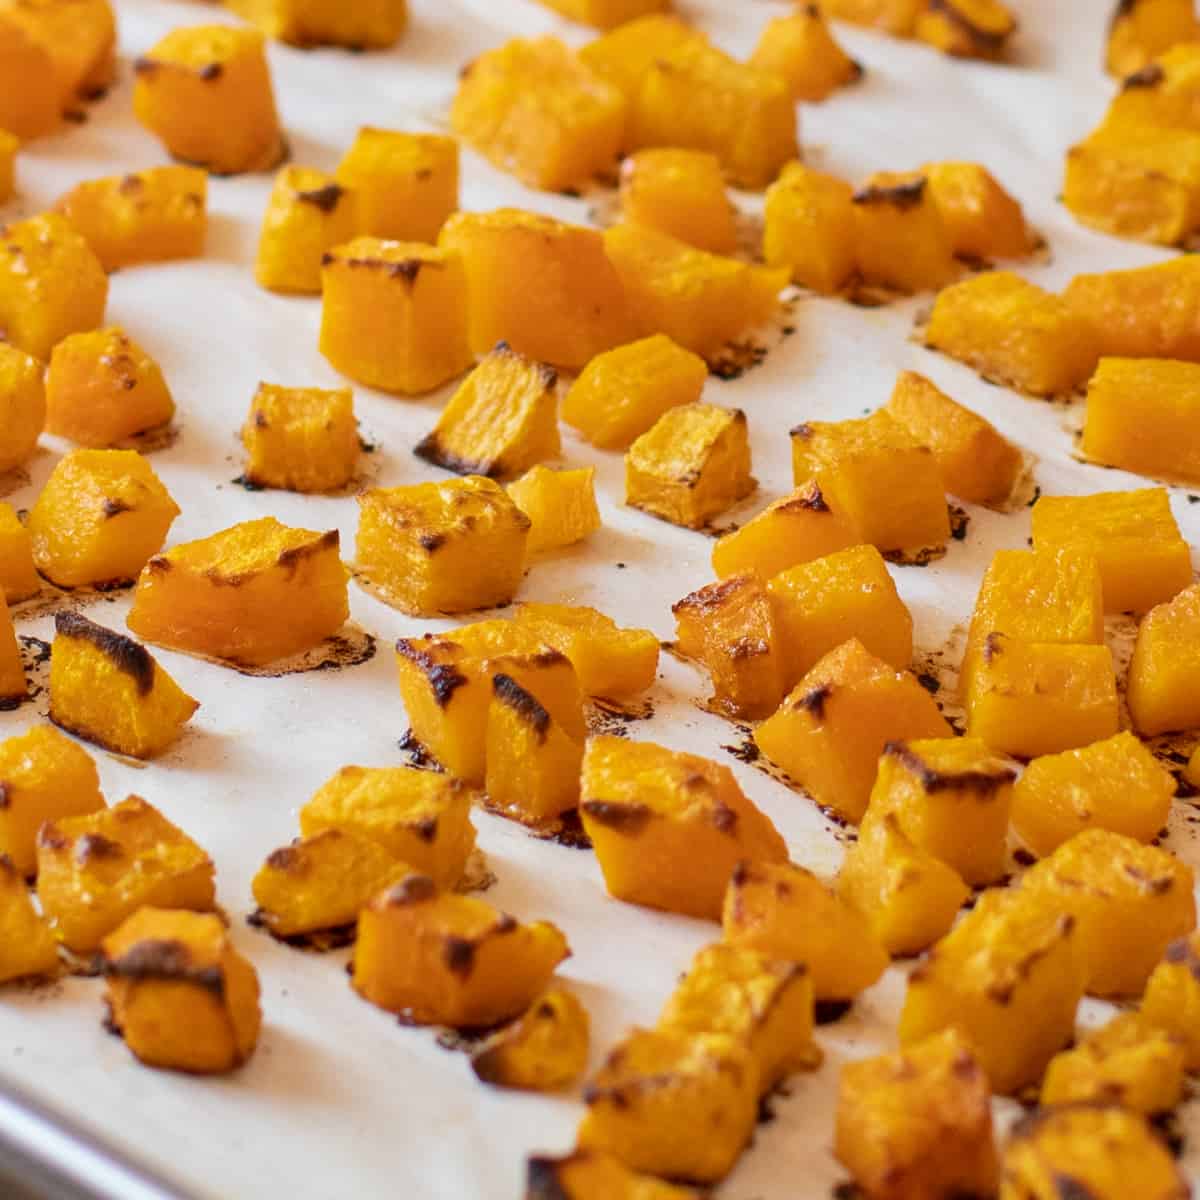 Cooked pieces of squash on a baking sheet lined with parchment paper.